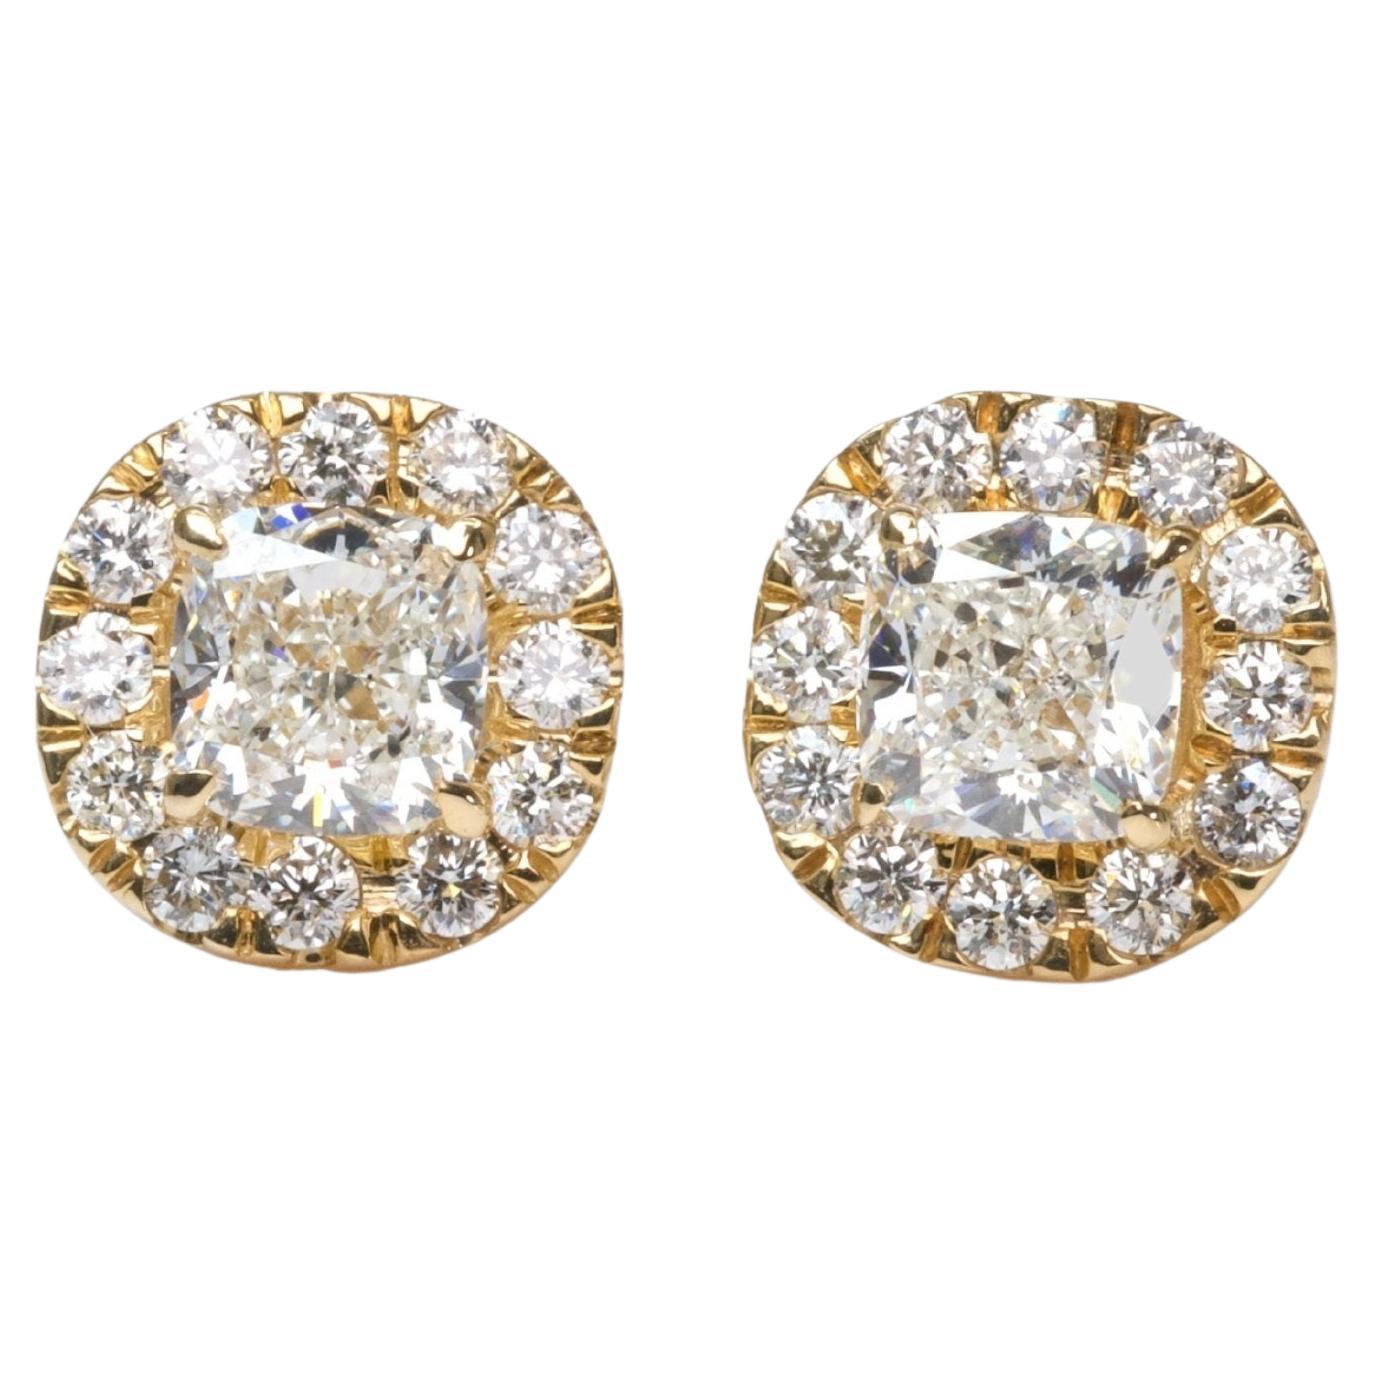 Sparkling 18k Yellow Gold Stud Halo Earrings with 1.40 Diamonds, GIA certificate